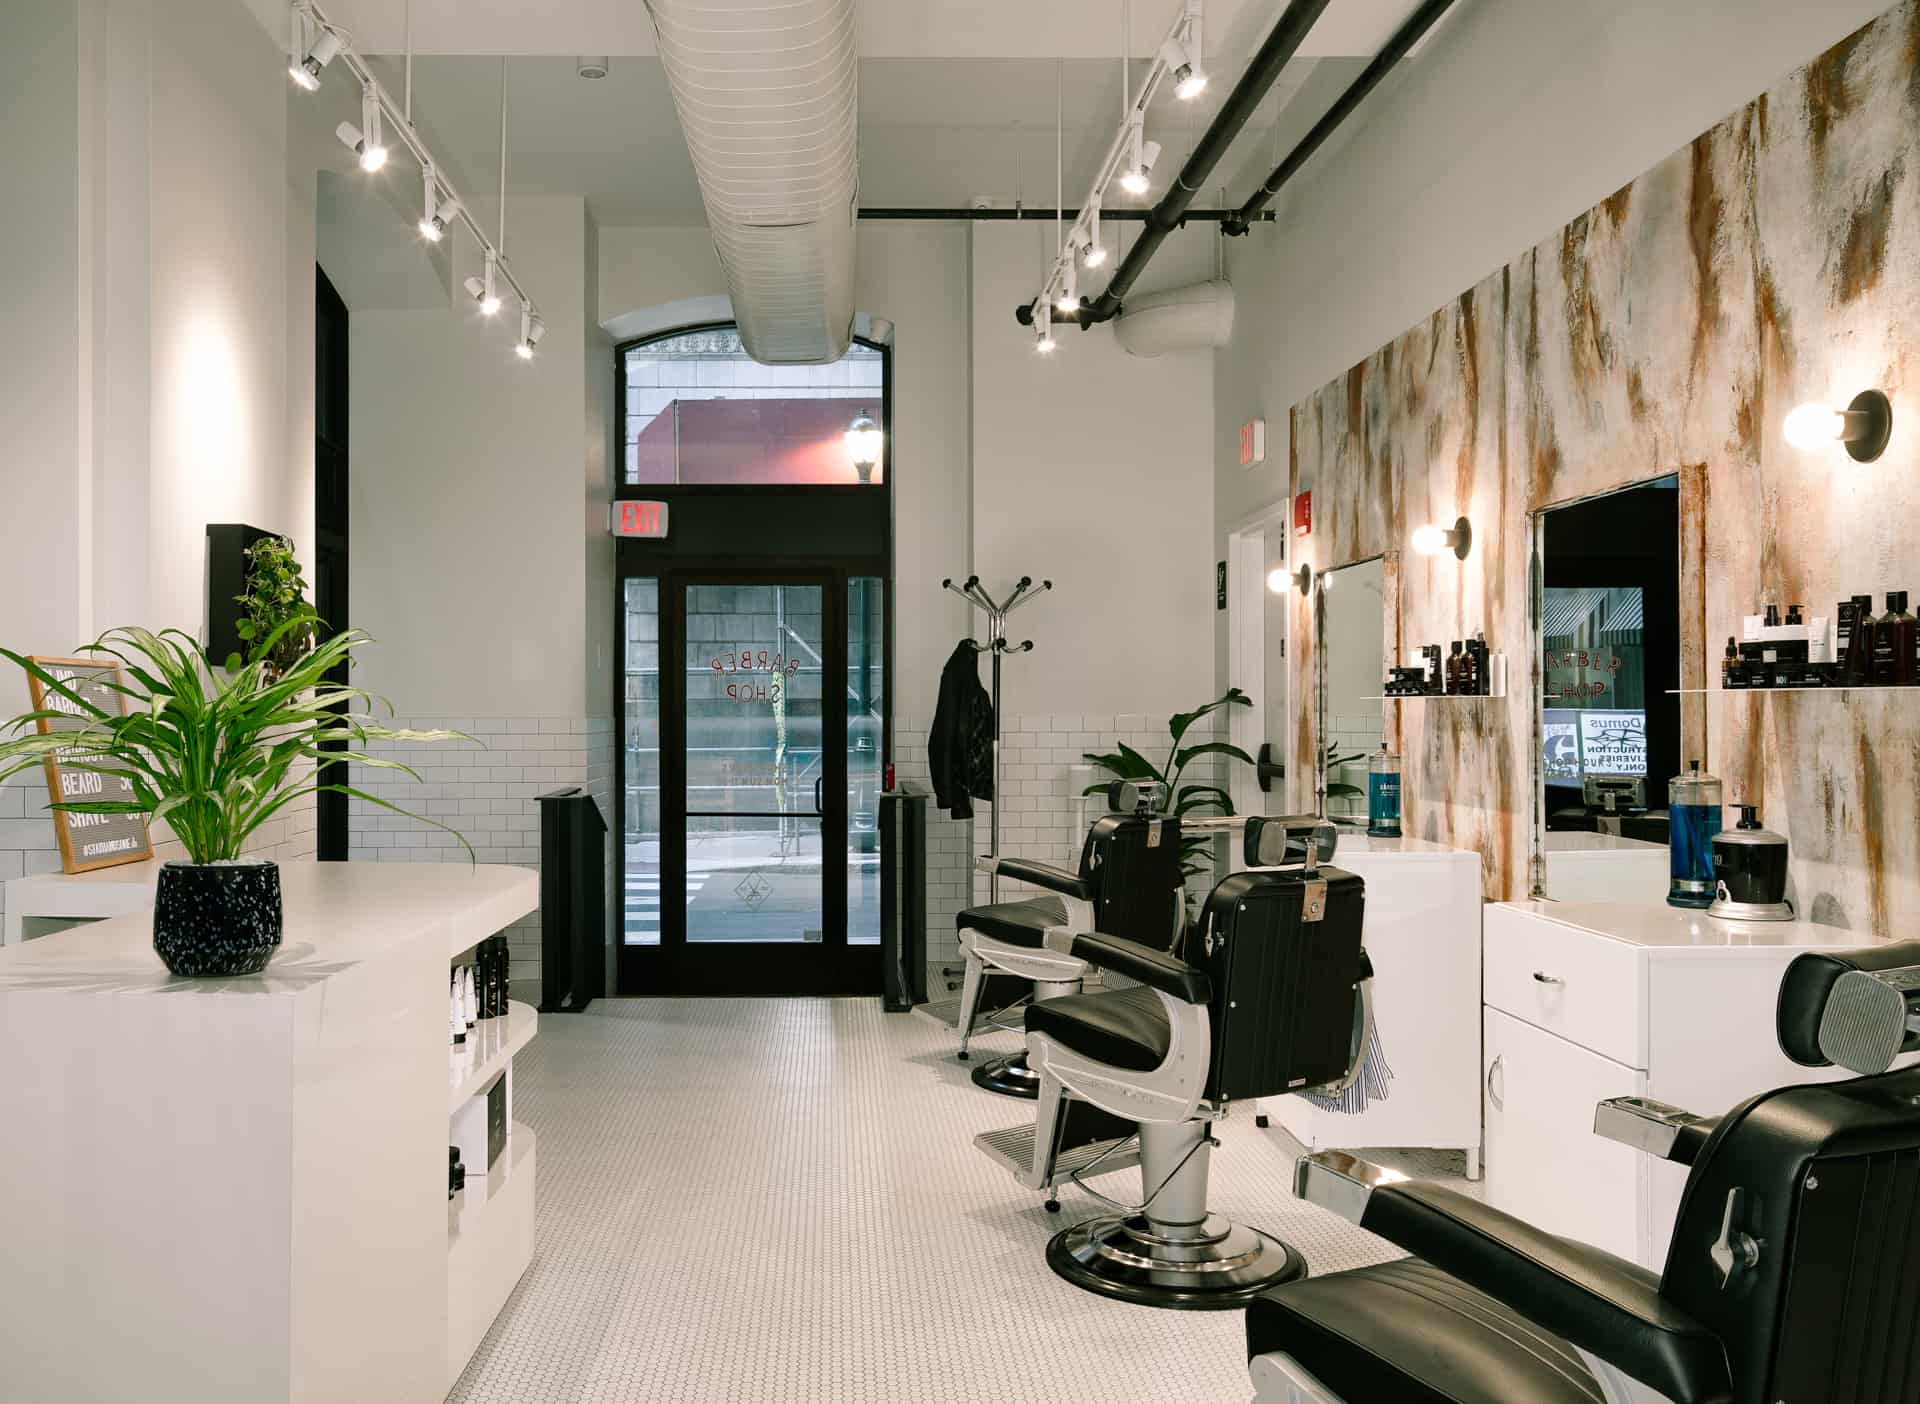 Service Retail Business Photograph of the Barbershop at Blind Barber in Philadelphia, PA